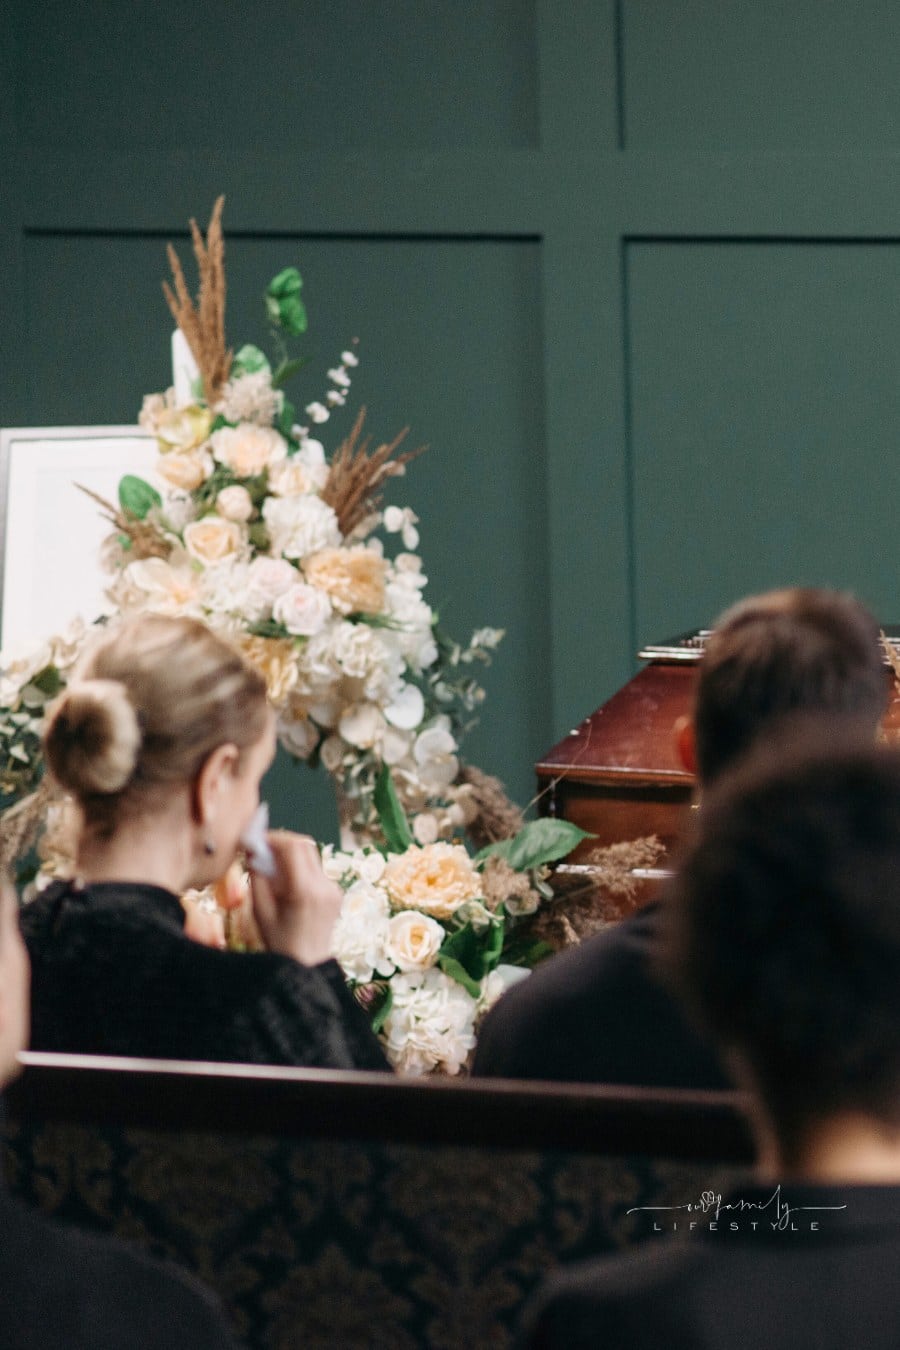 Mourners sitting in pews with a Coffin anf flowers at a Funeral Service